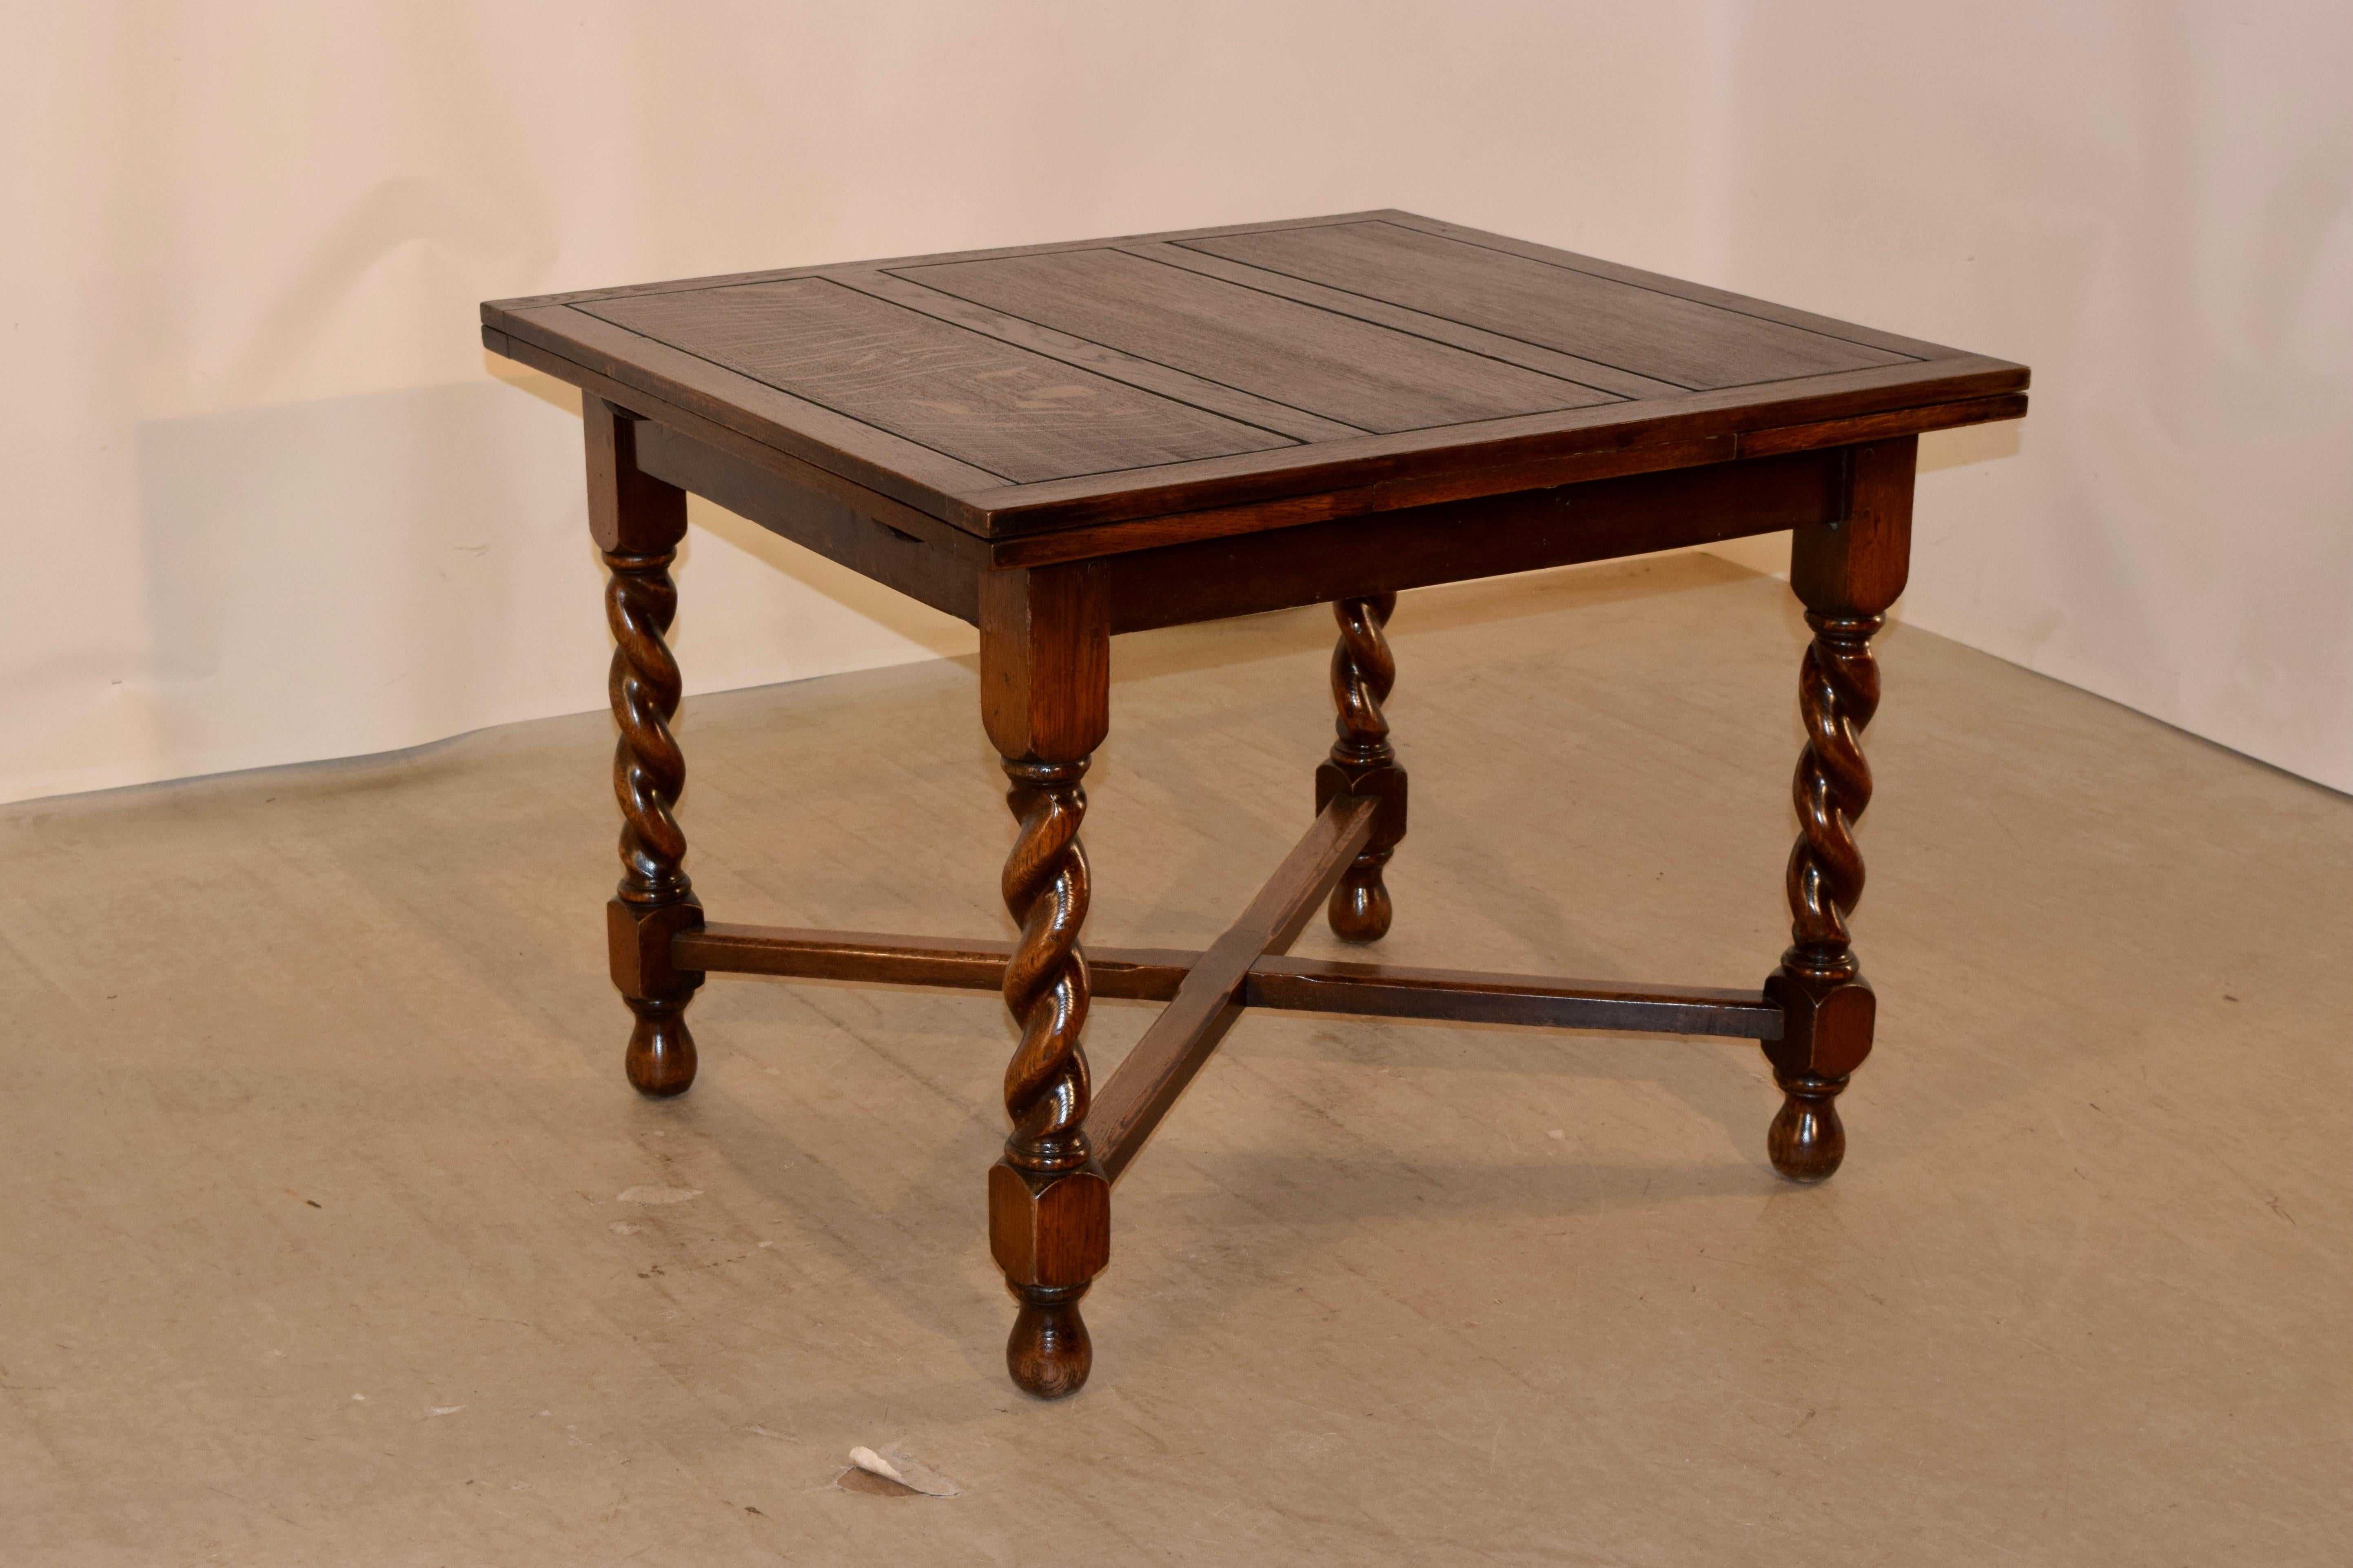 English oak table with two draw-leaves circa 1900. The table has a nicely paneled top and leaves over a simple apron and supported on hand-turned barley twist legs, which are joined by simple cross stretchers and raised on hand-turned bun feet. The